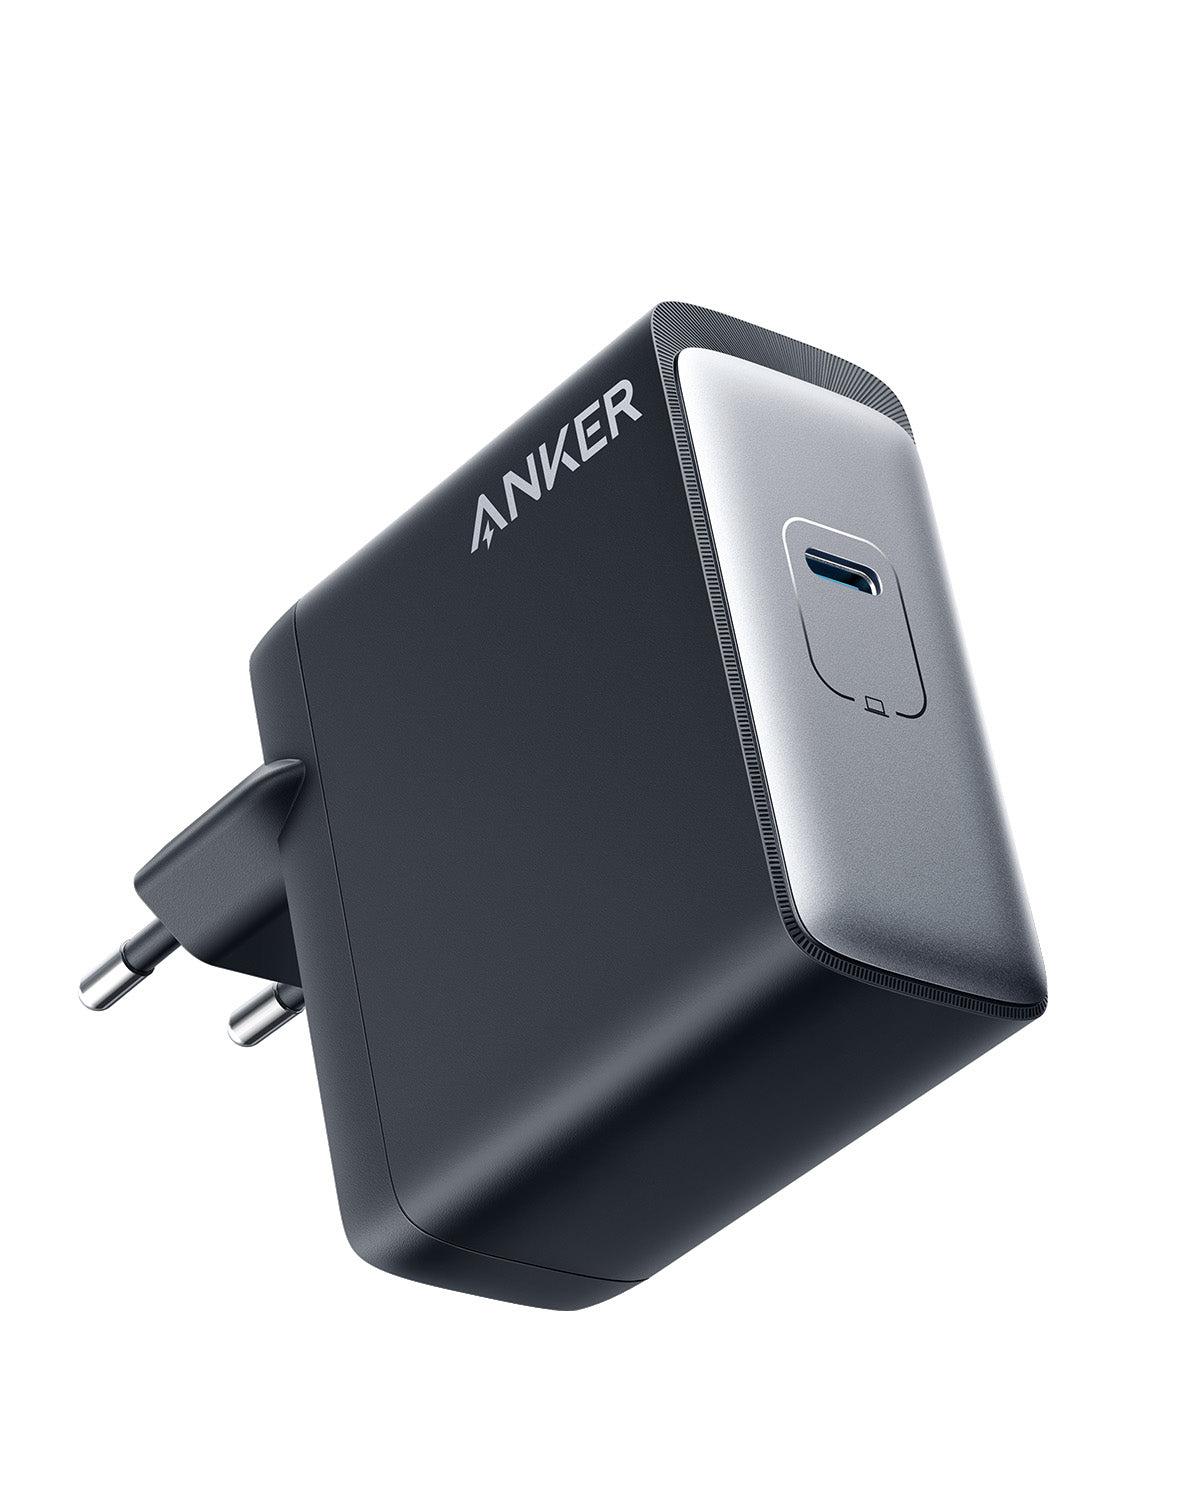 Anker <b>717</b> Charger (140W)